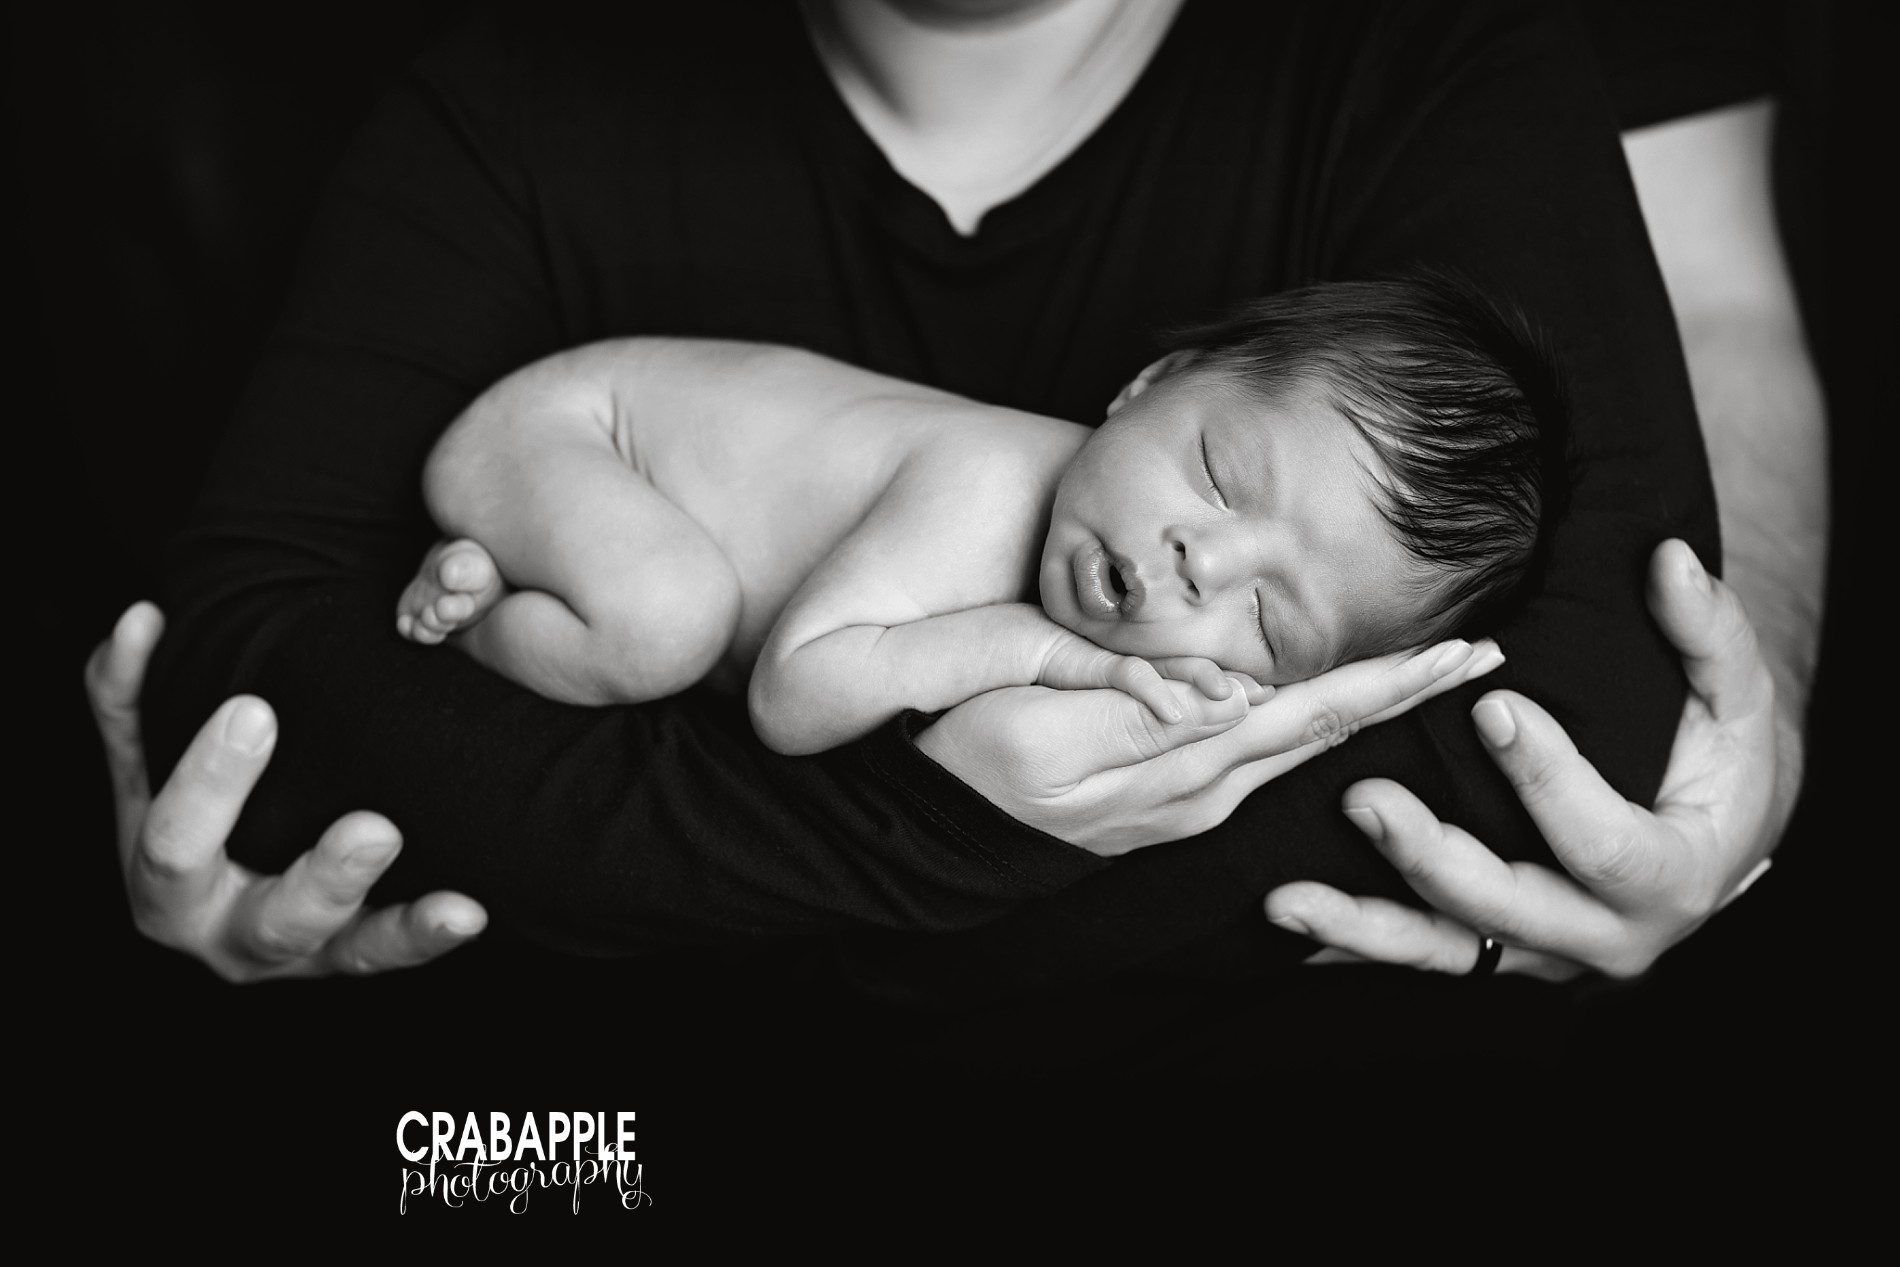 black and white newborn photo of baby boy held in mom's arms with dad's hands holding them both